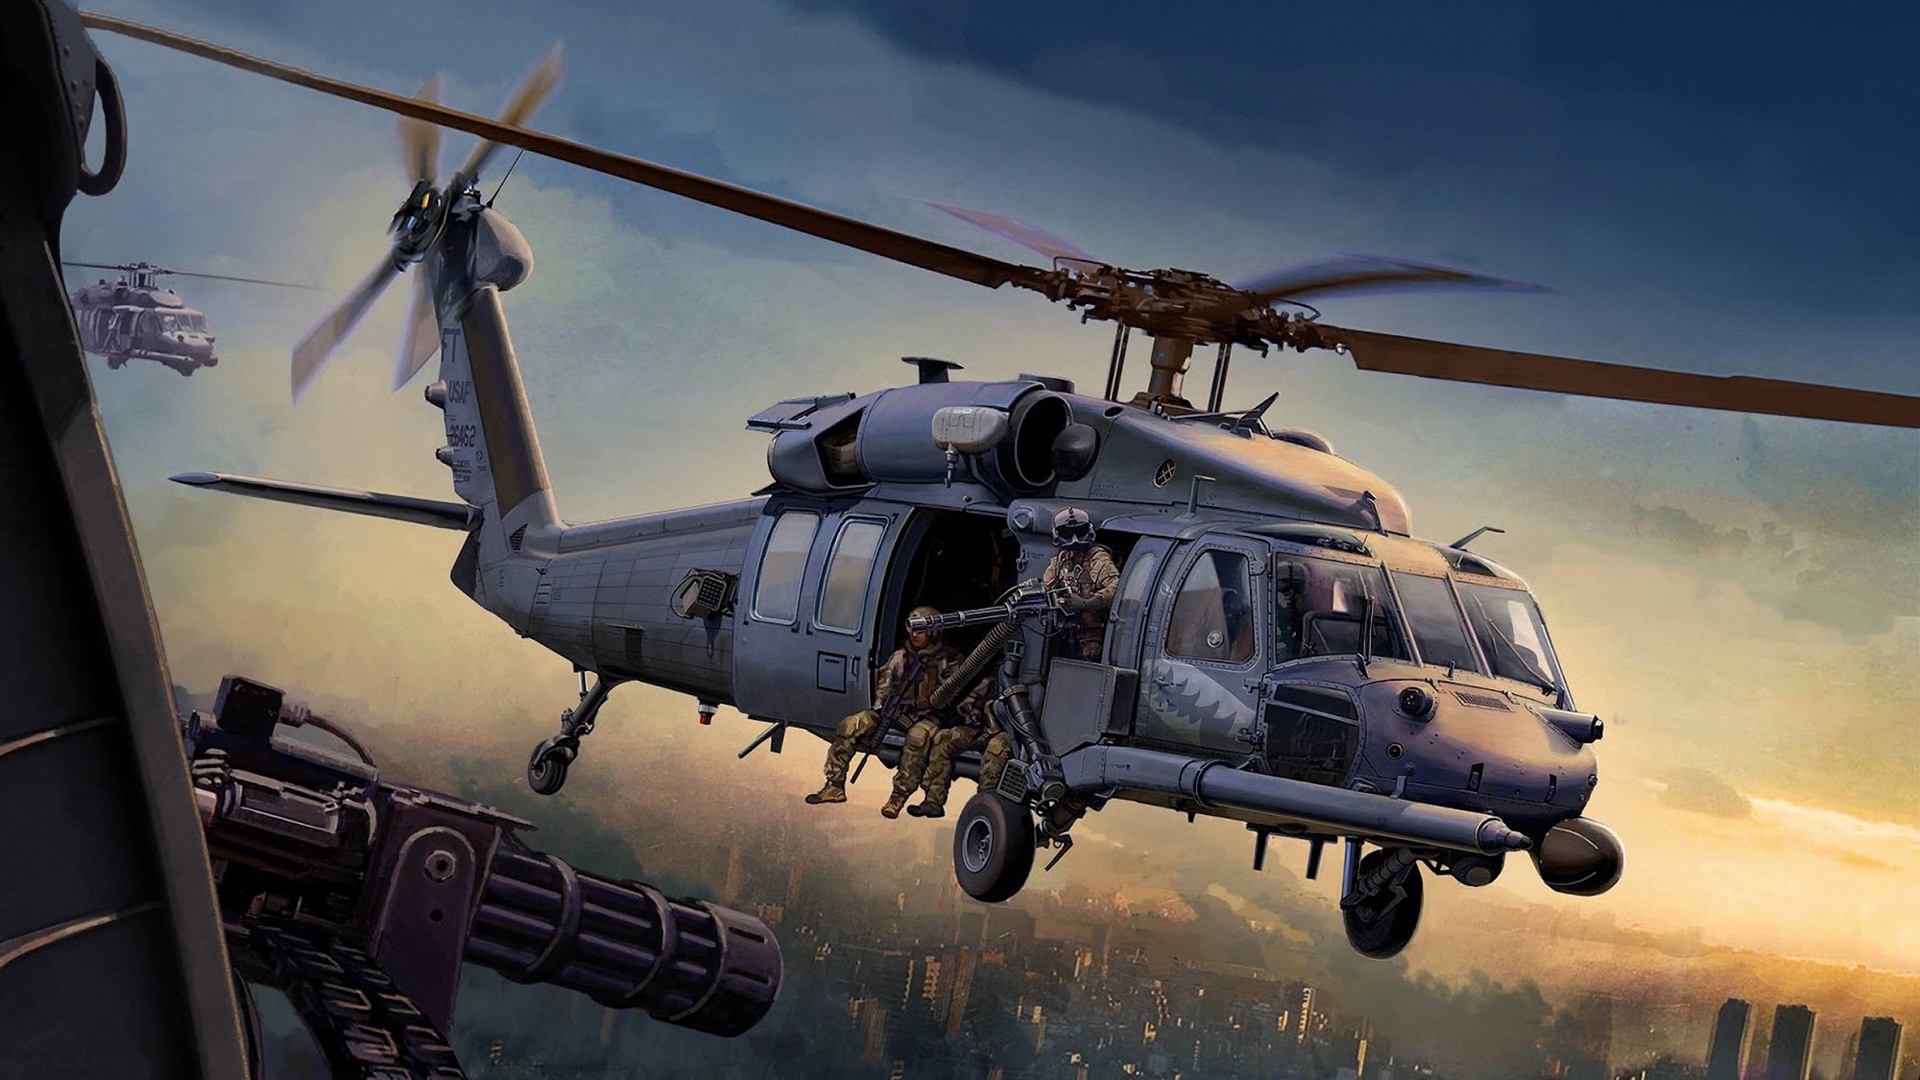 Aircraft Artistic Helicopter Sikorsky Hh 60 Pave Hawk 1920x1080